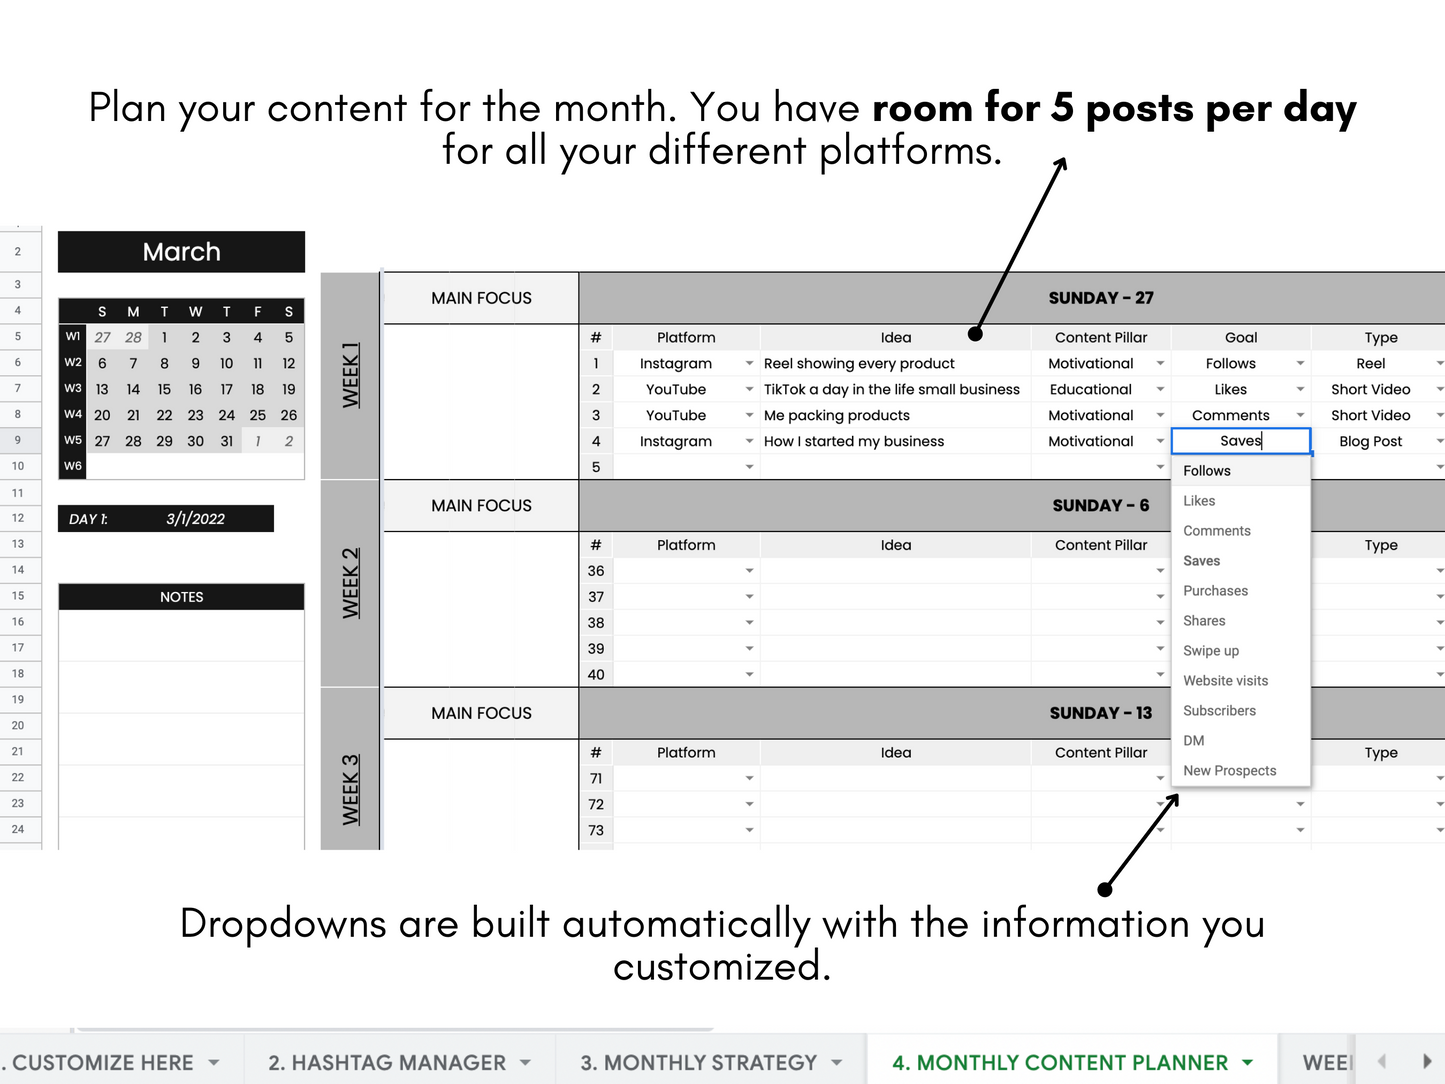 Monthly Social Media Content Planner - Black